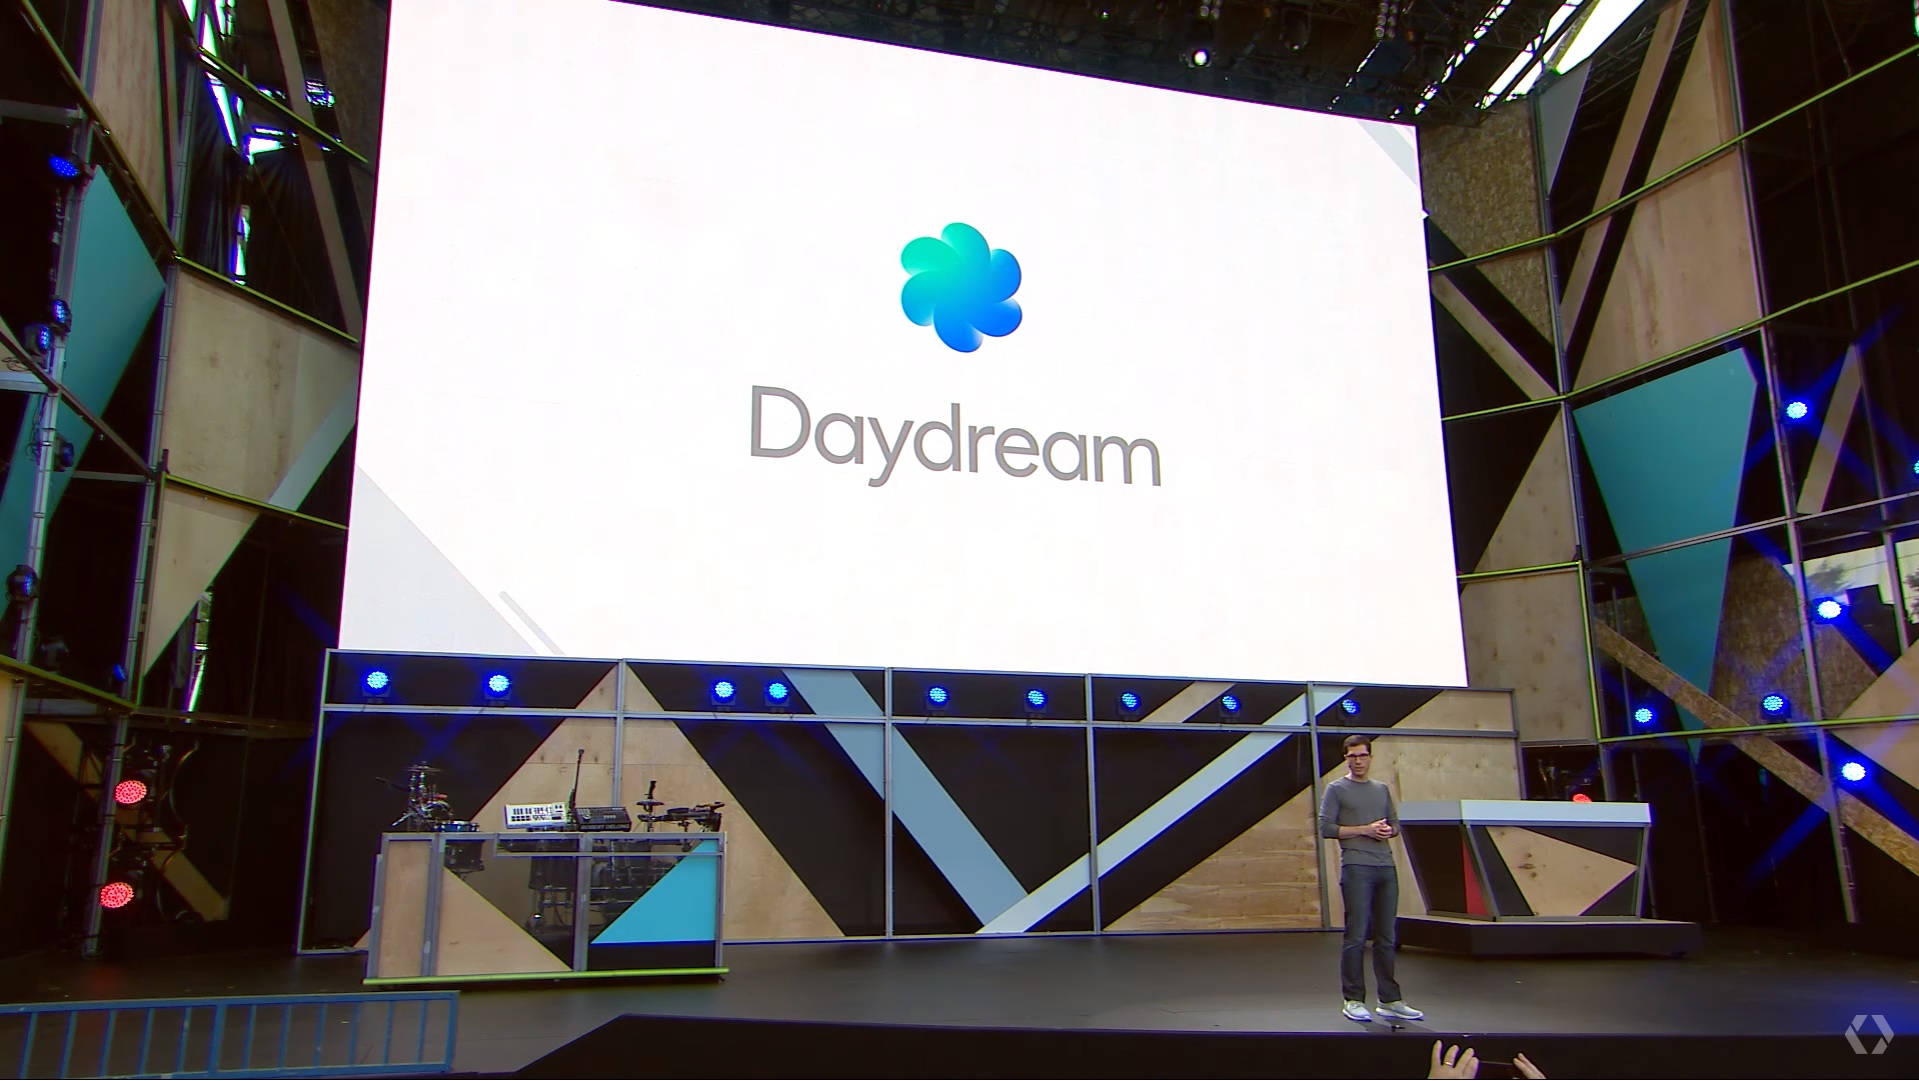 Google VR head Clay Bavor talks about Google Daydream at the Google I/O developer conference in Mountain View, California, in May 2016.